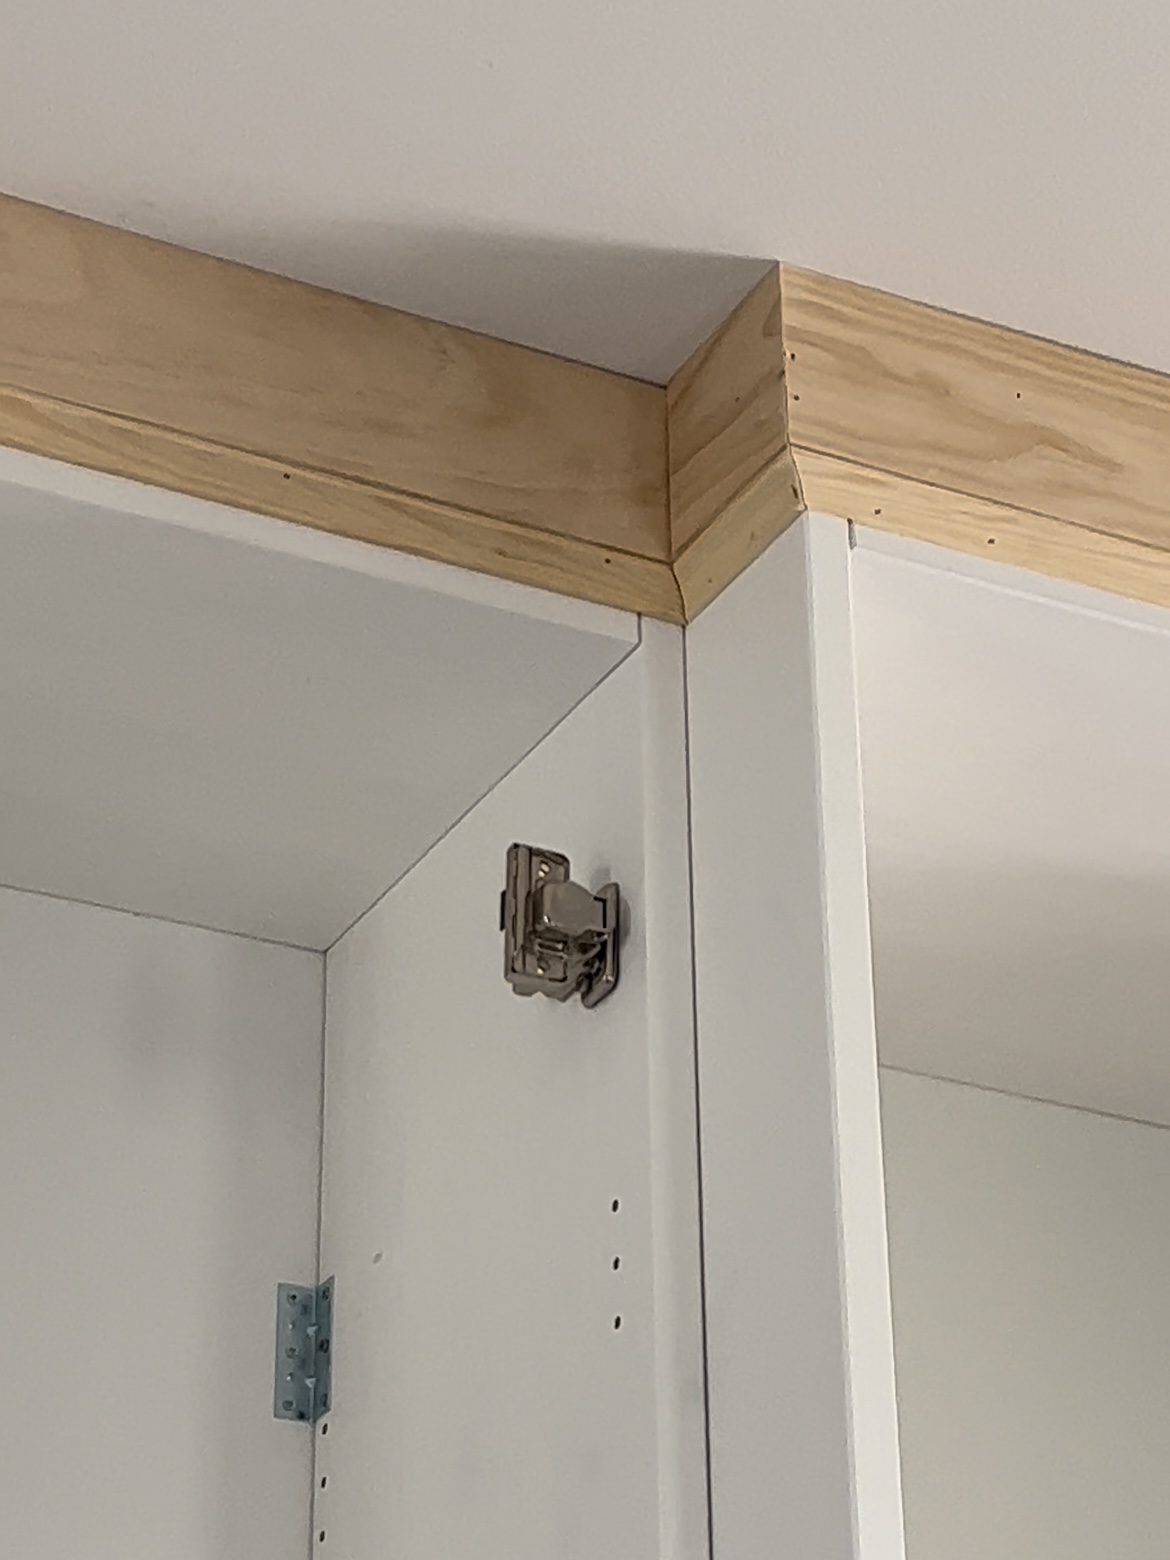 Crown moulding attached to cabinets and ceiling.